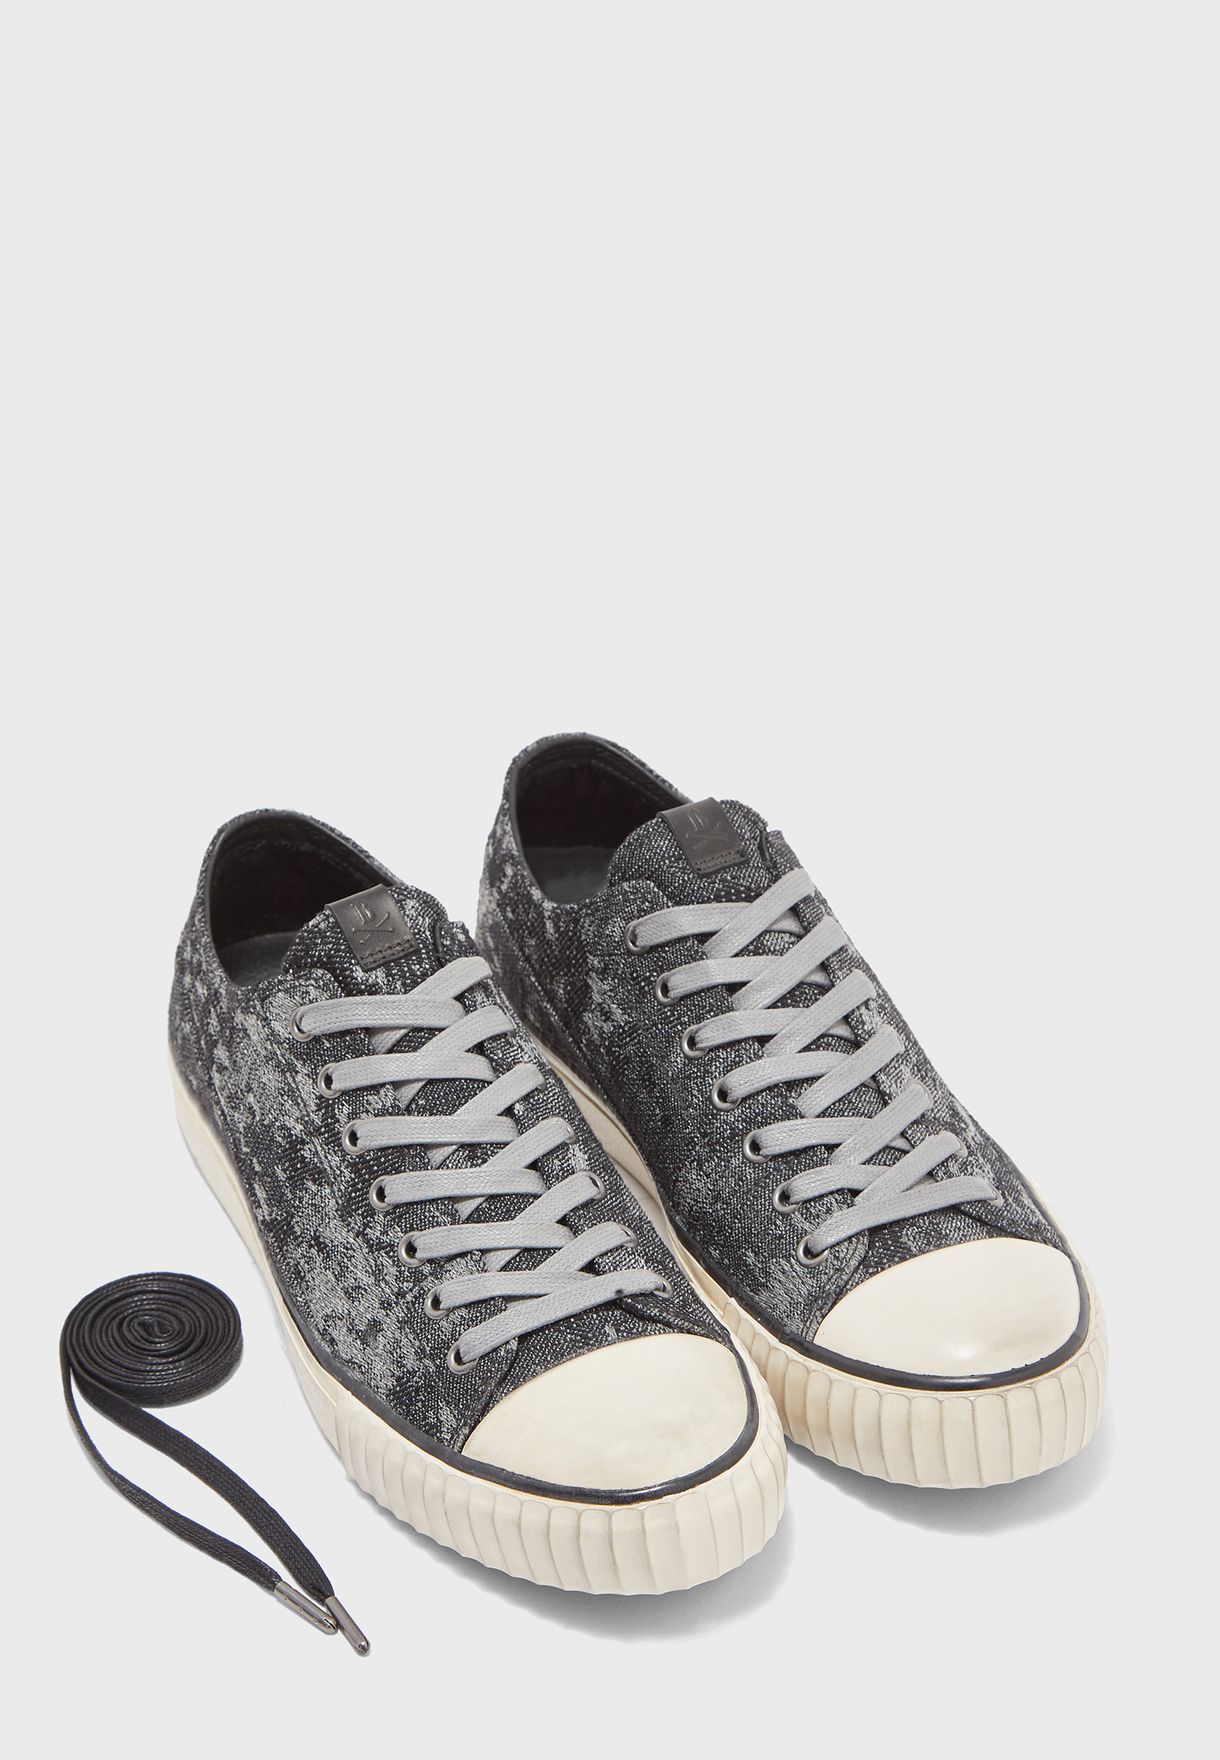 Abstract Camo Jacquard Sneakers